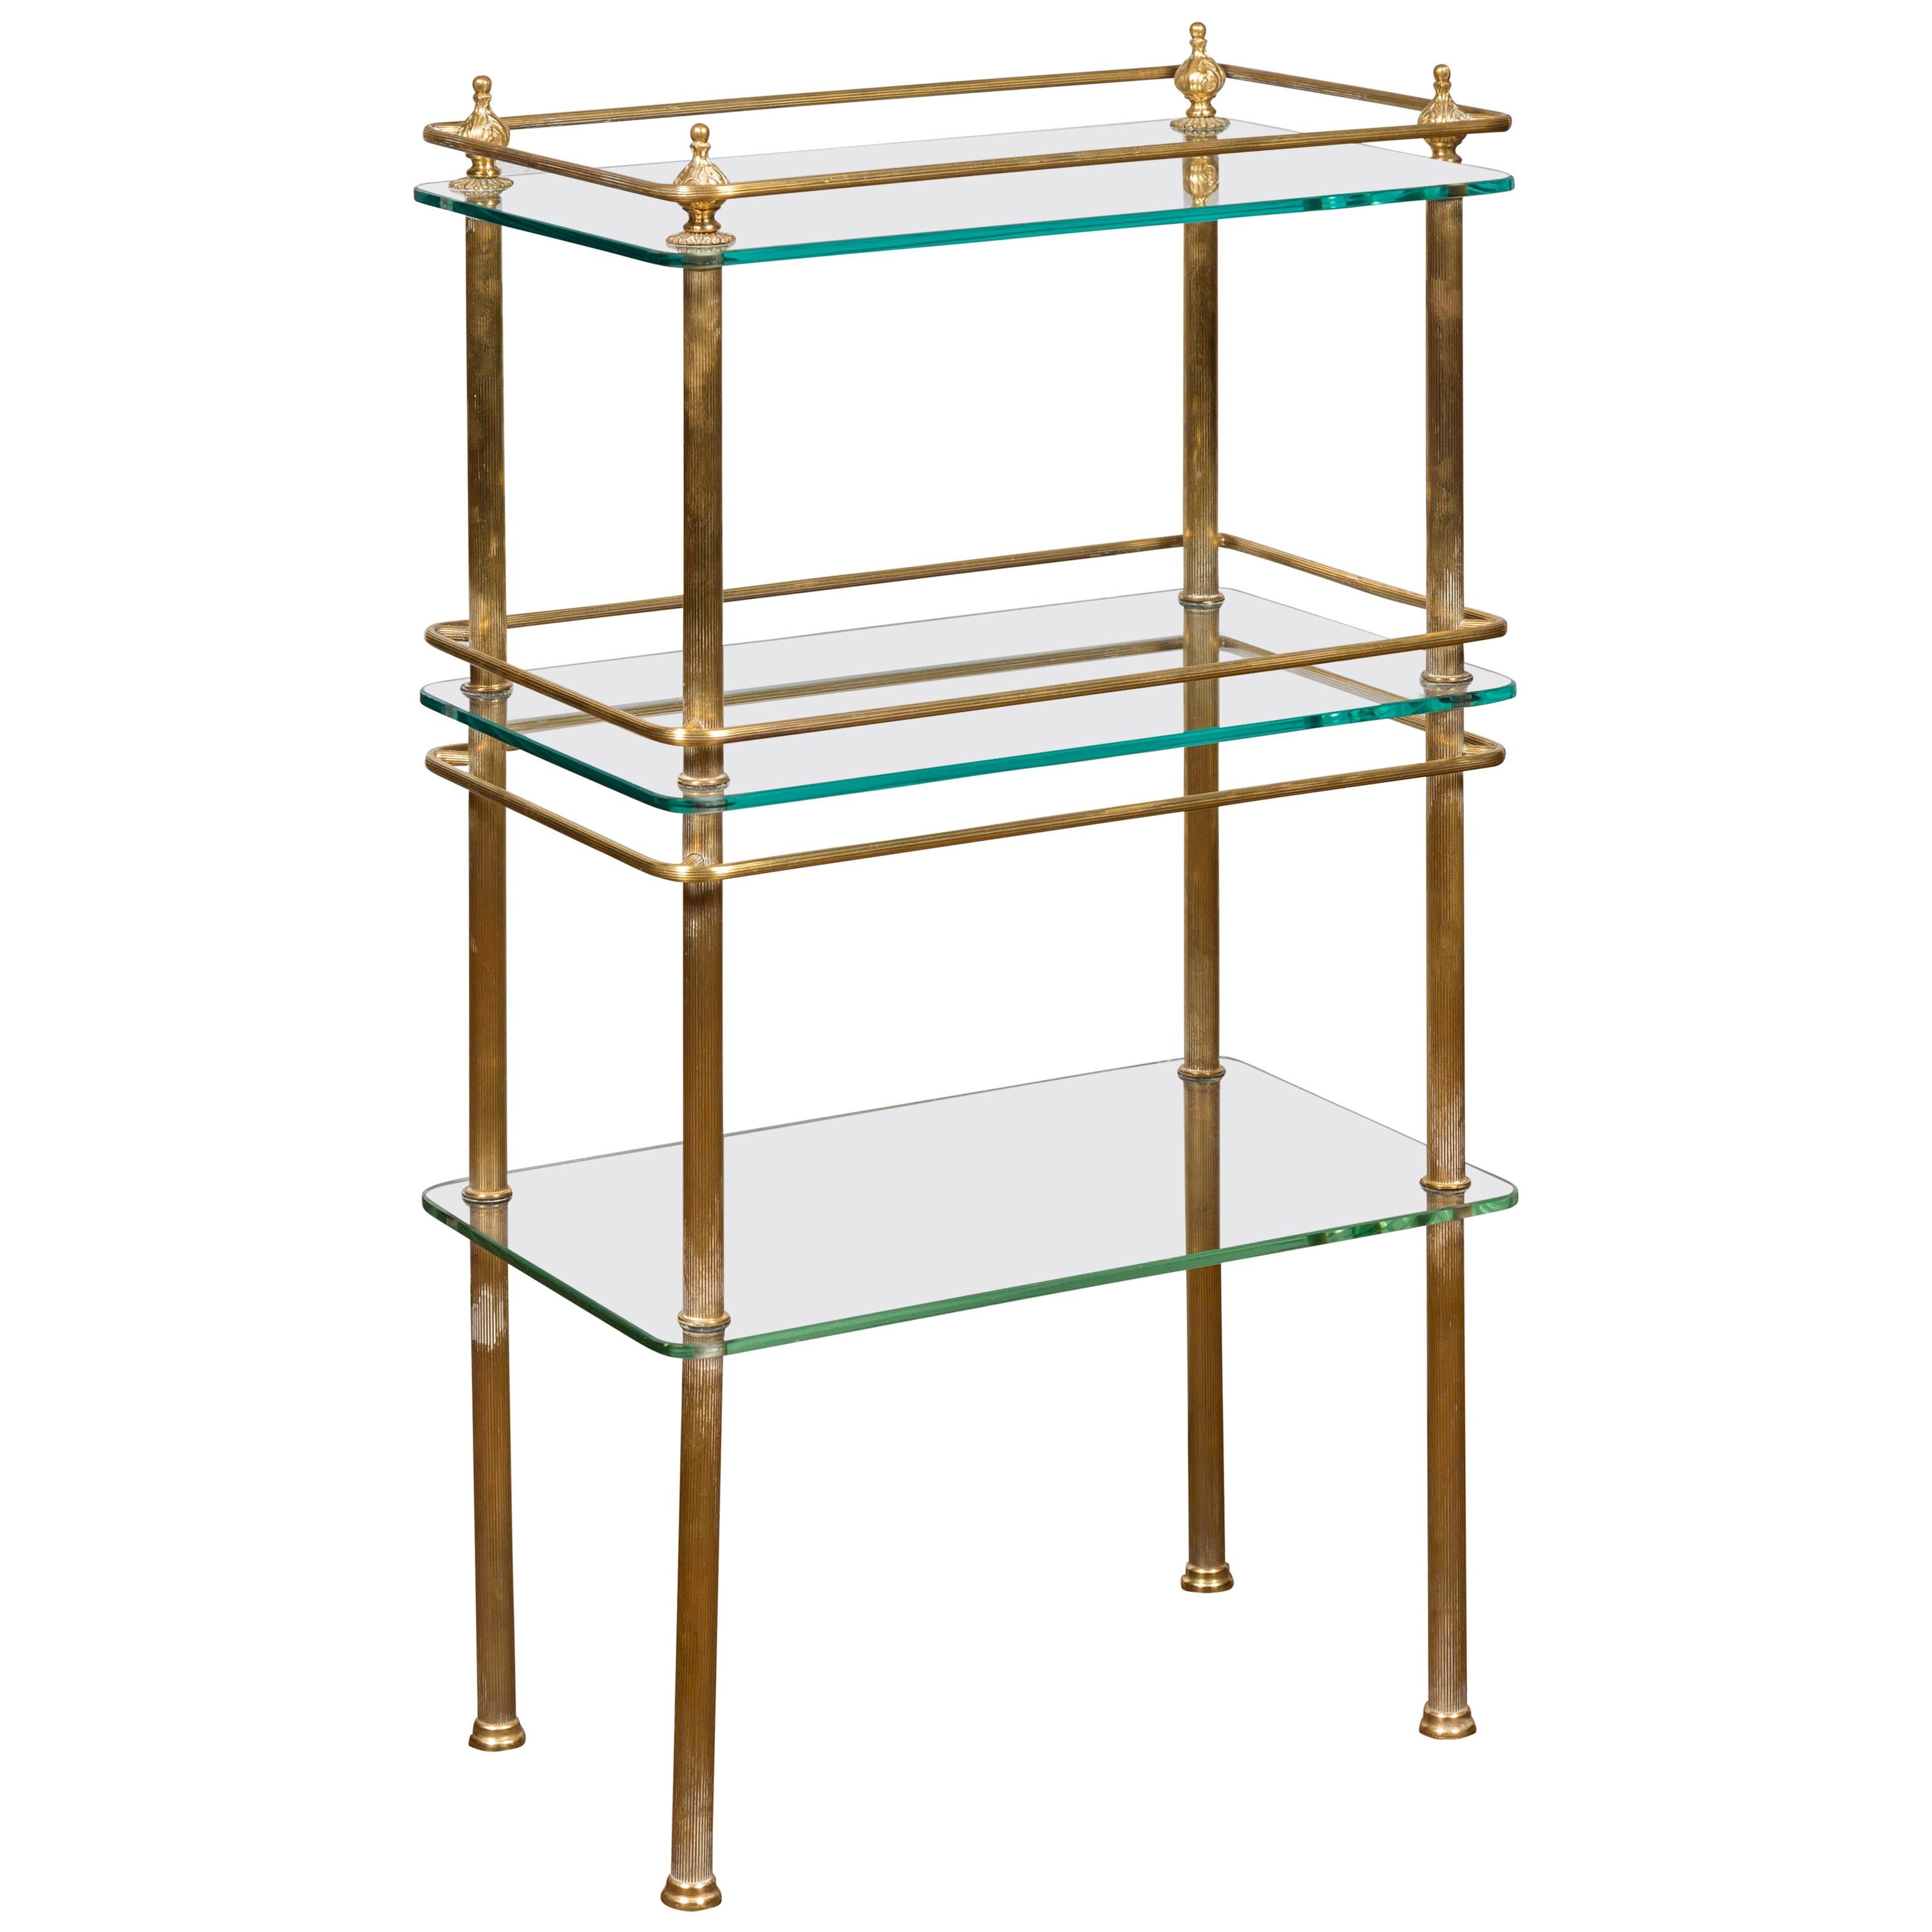 Italian Midcentury Tiered Brass Side Table with Glass Shelves and Petite Finials